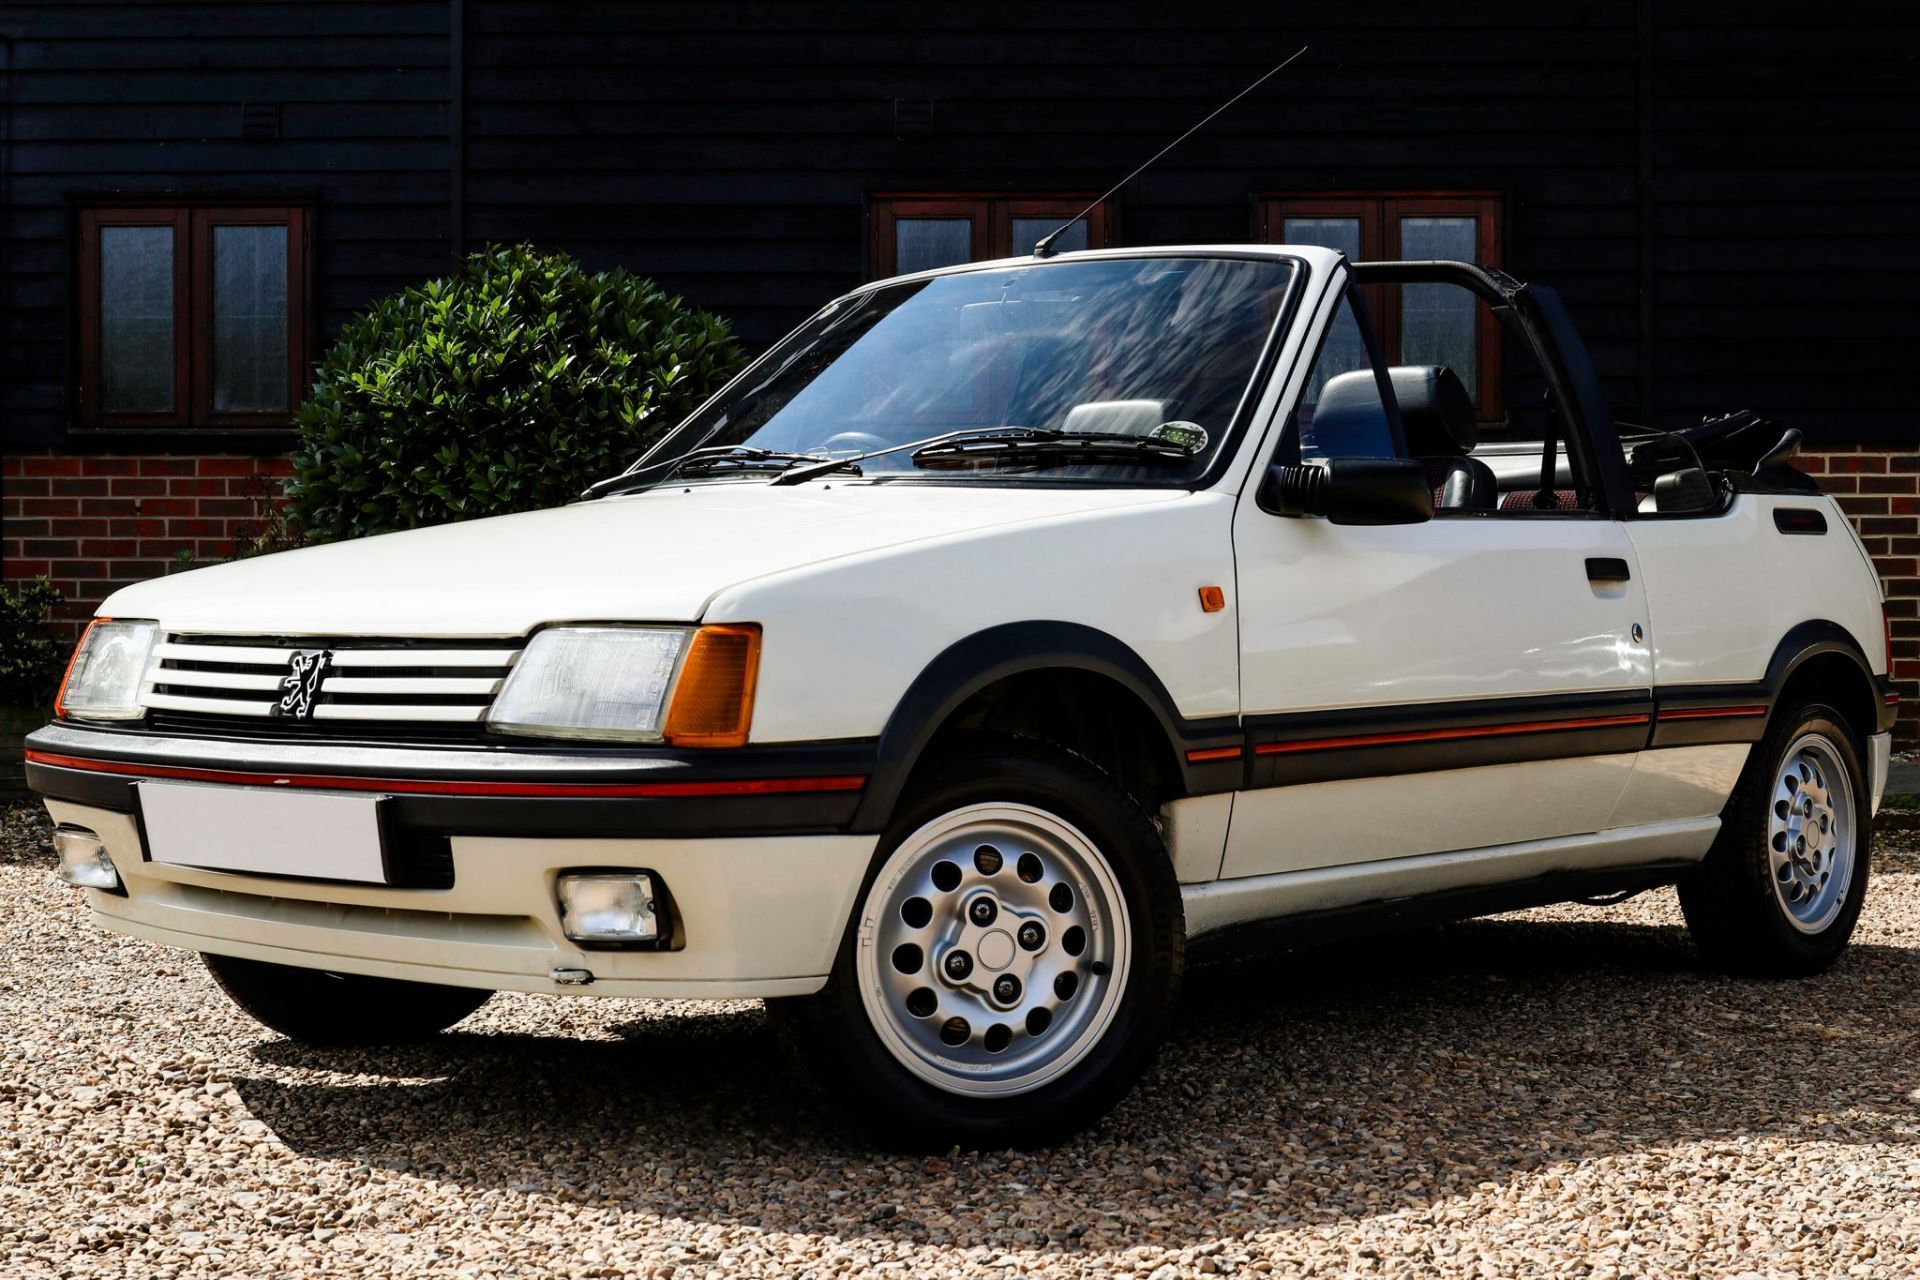 1989 PEUGEOT 205 CTI CABRIOLET CONVERTIBLE, 115hp, 1590cc PETROL ENGINE - OVER 30 SERVICES RECORDED - Image 3 of 12